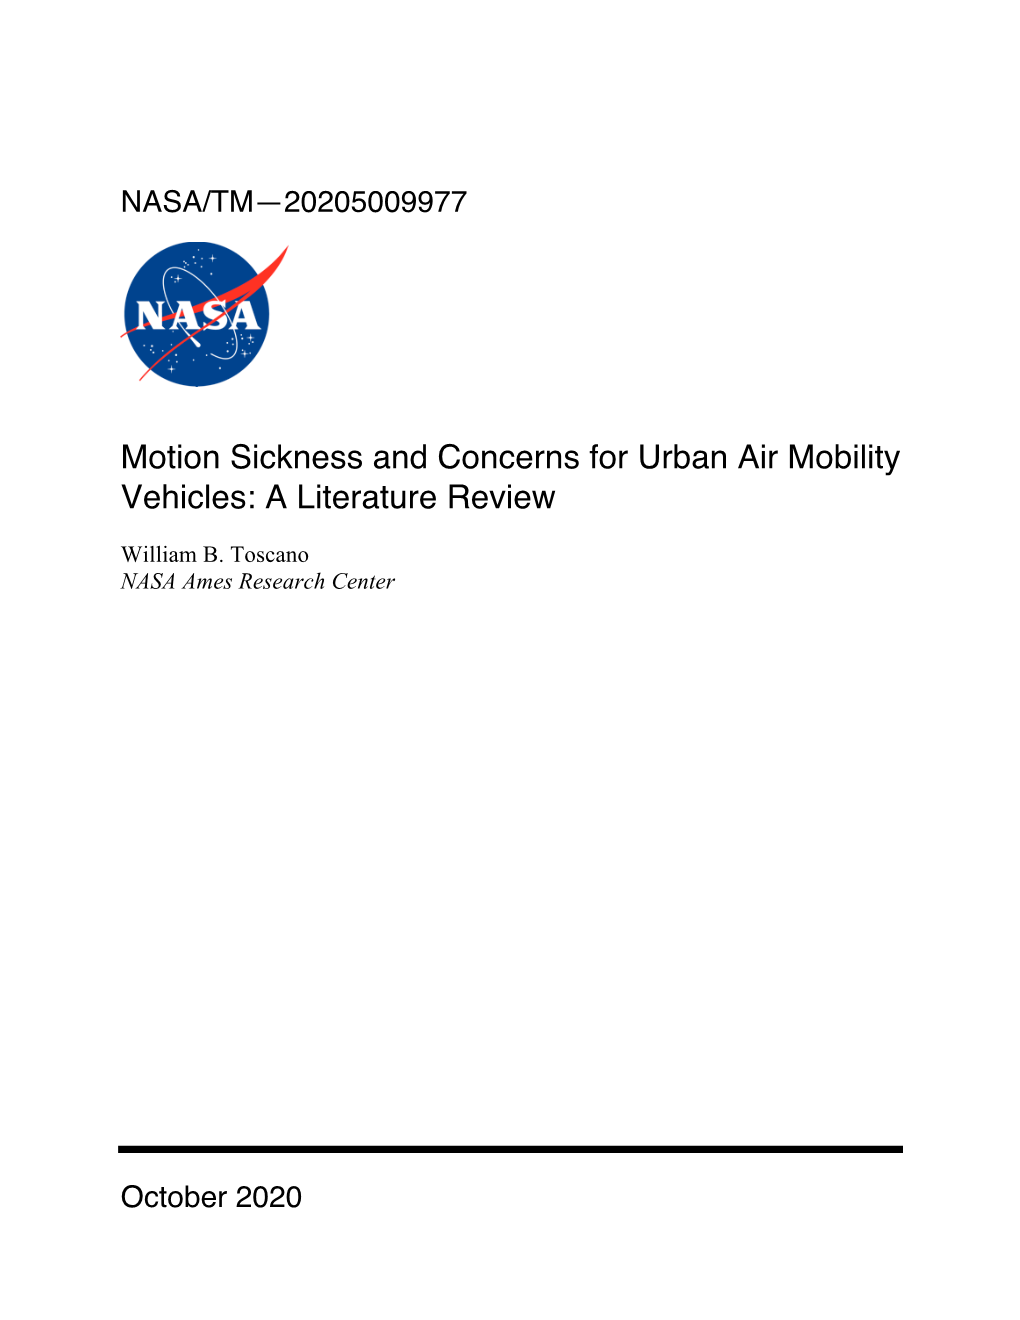 Motion Sickness and Concerns for Urban Air Mobility Vehicles: a Literature Review